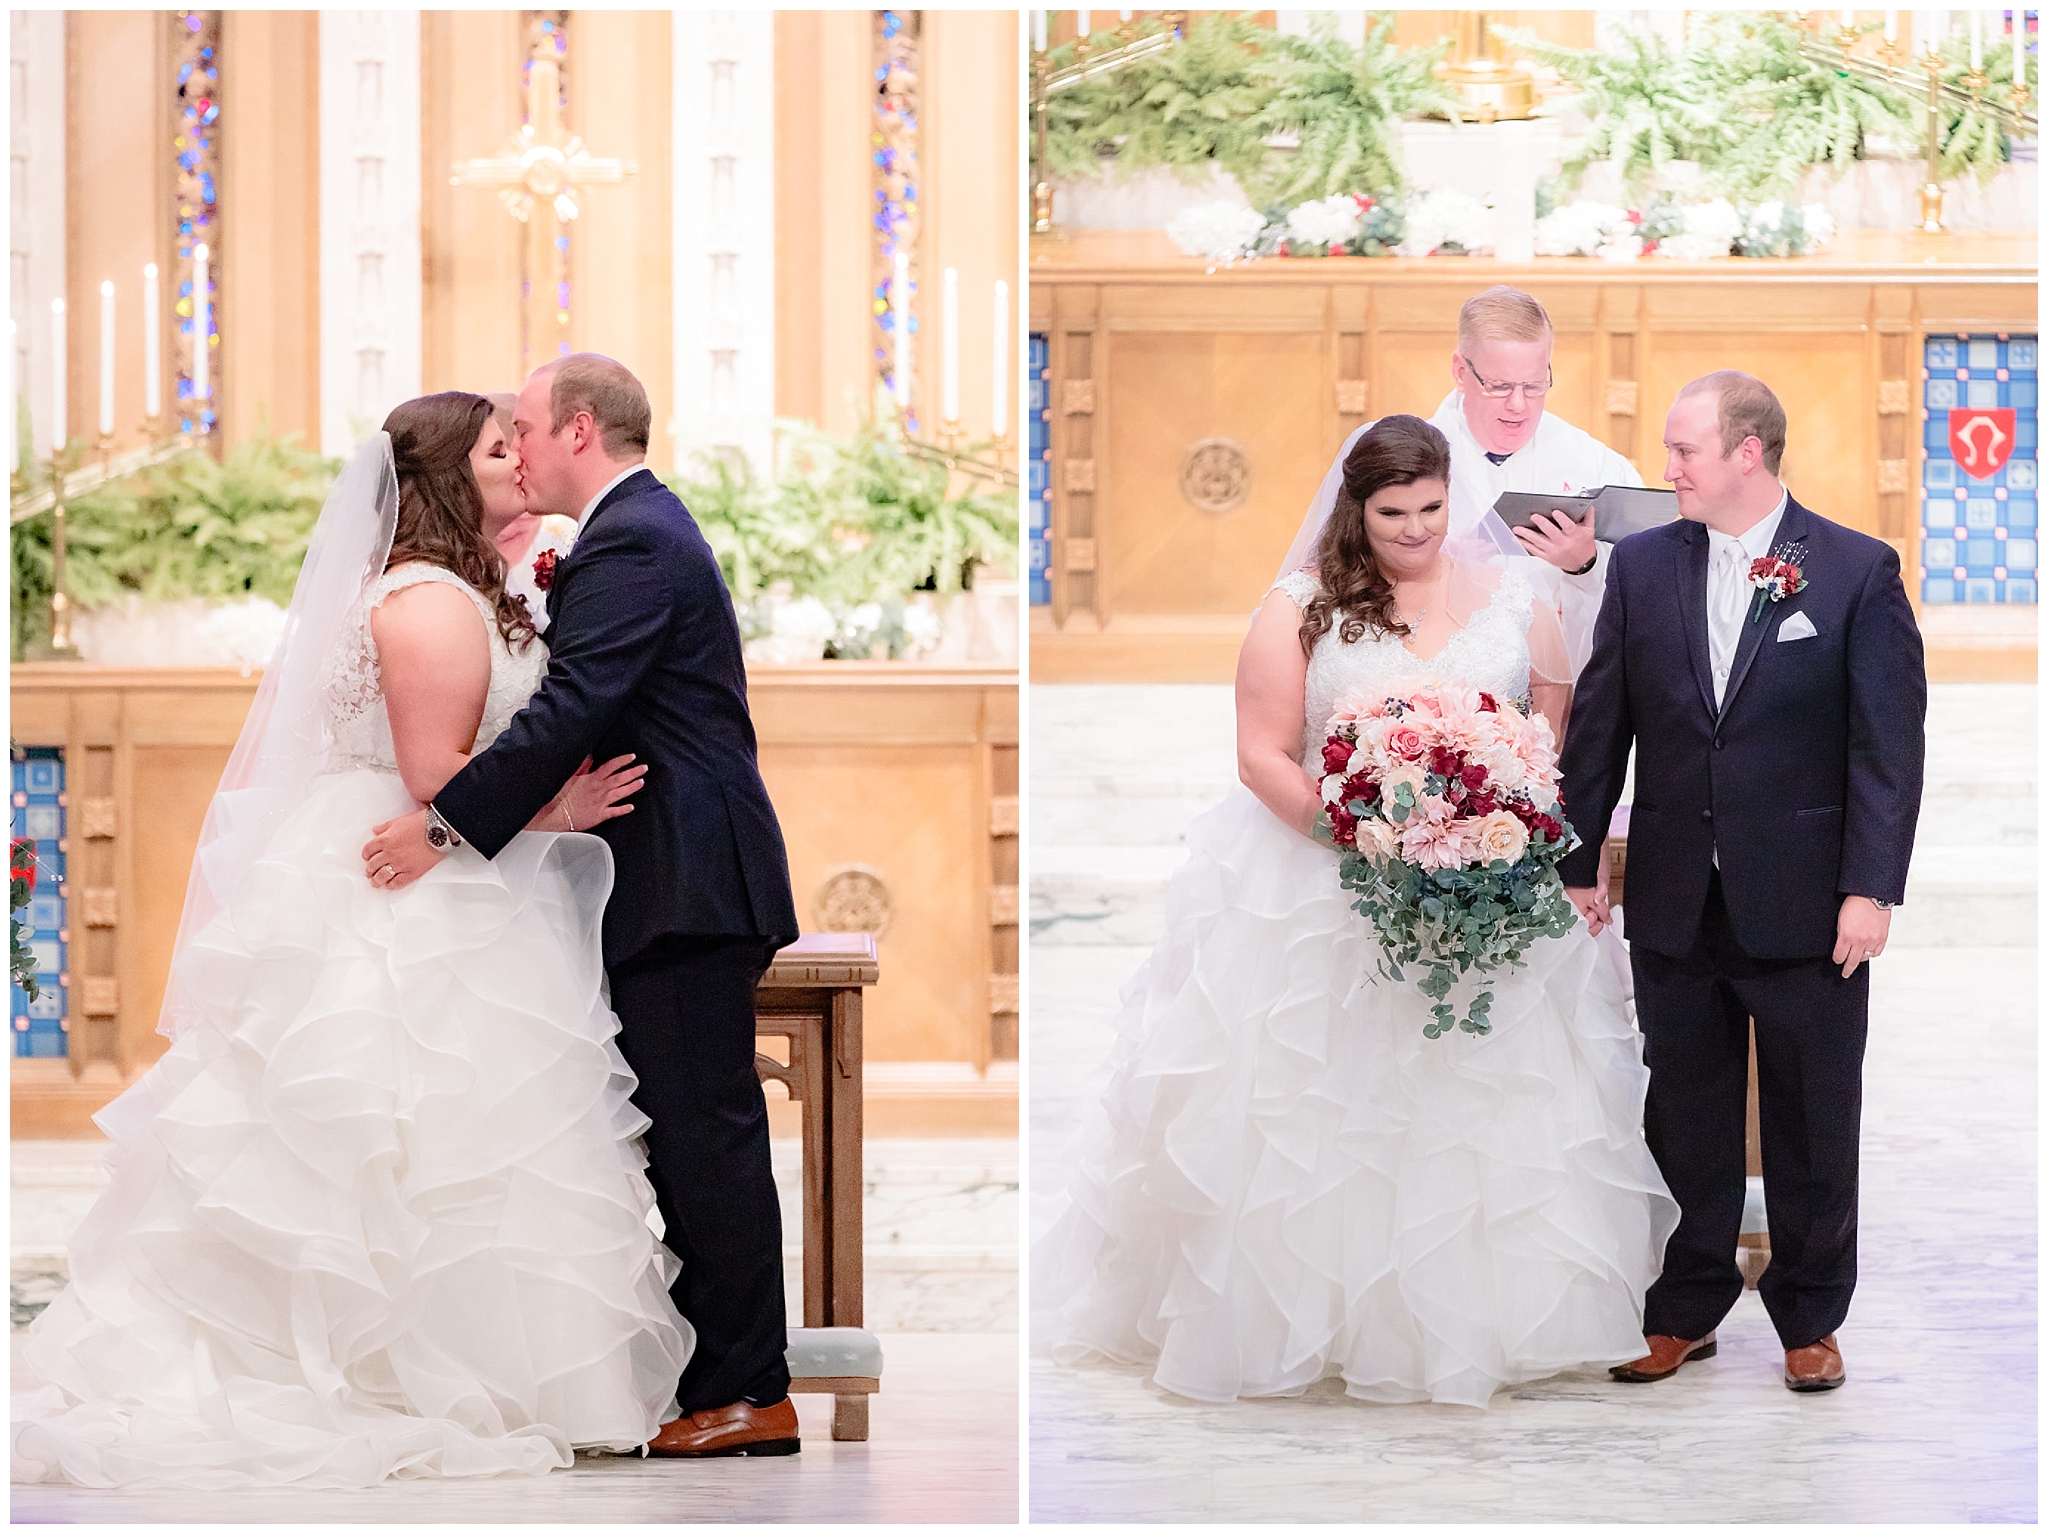 The bride and groom's first kiss at Mt. Lebanon United Methodist Church